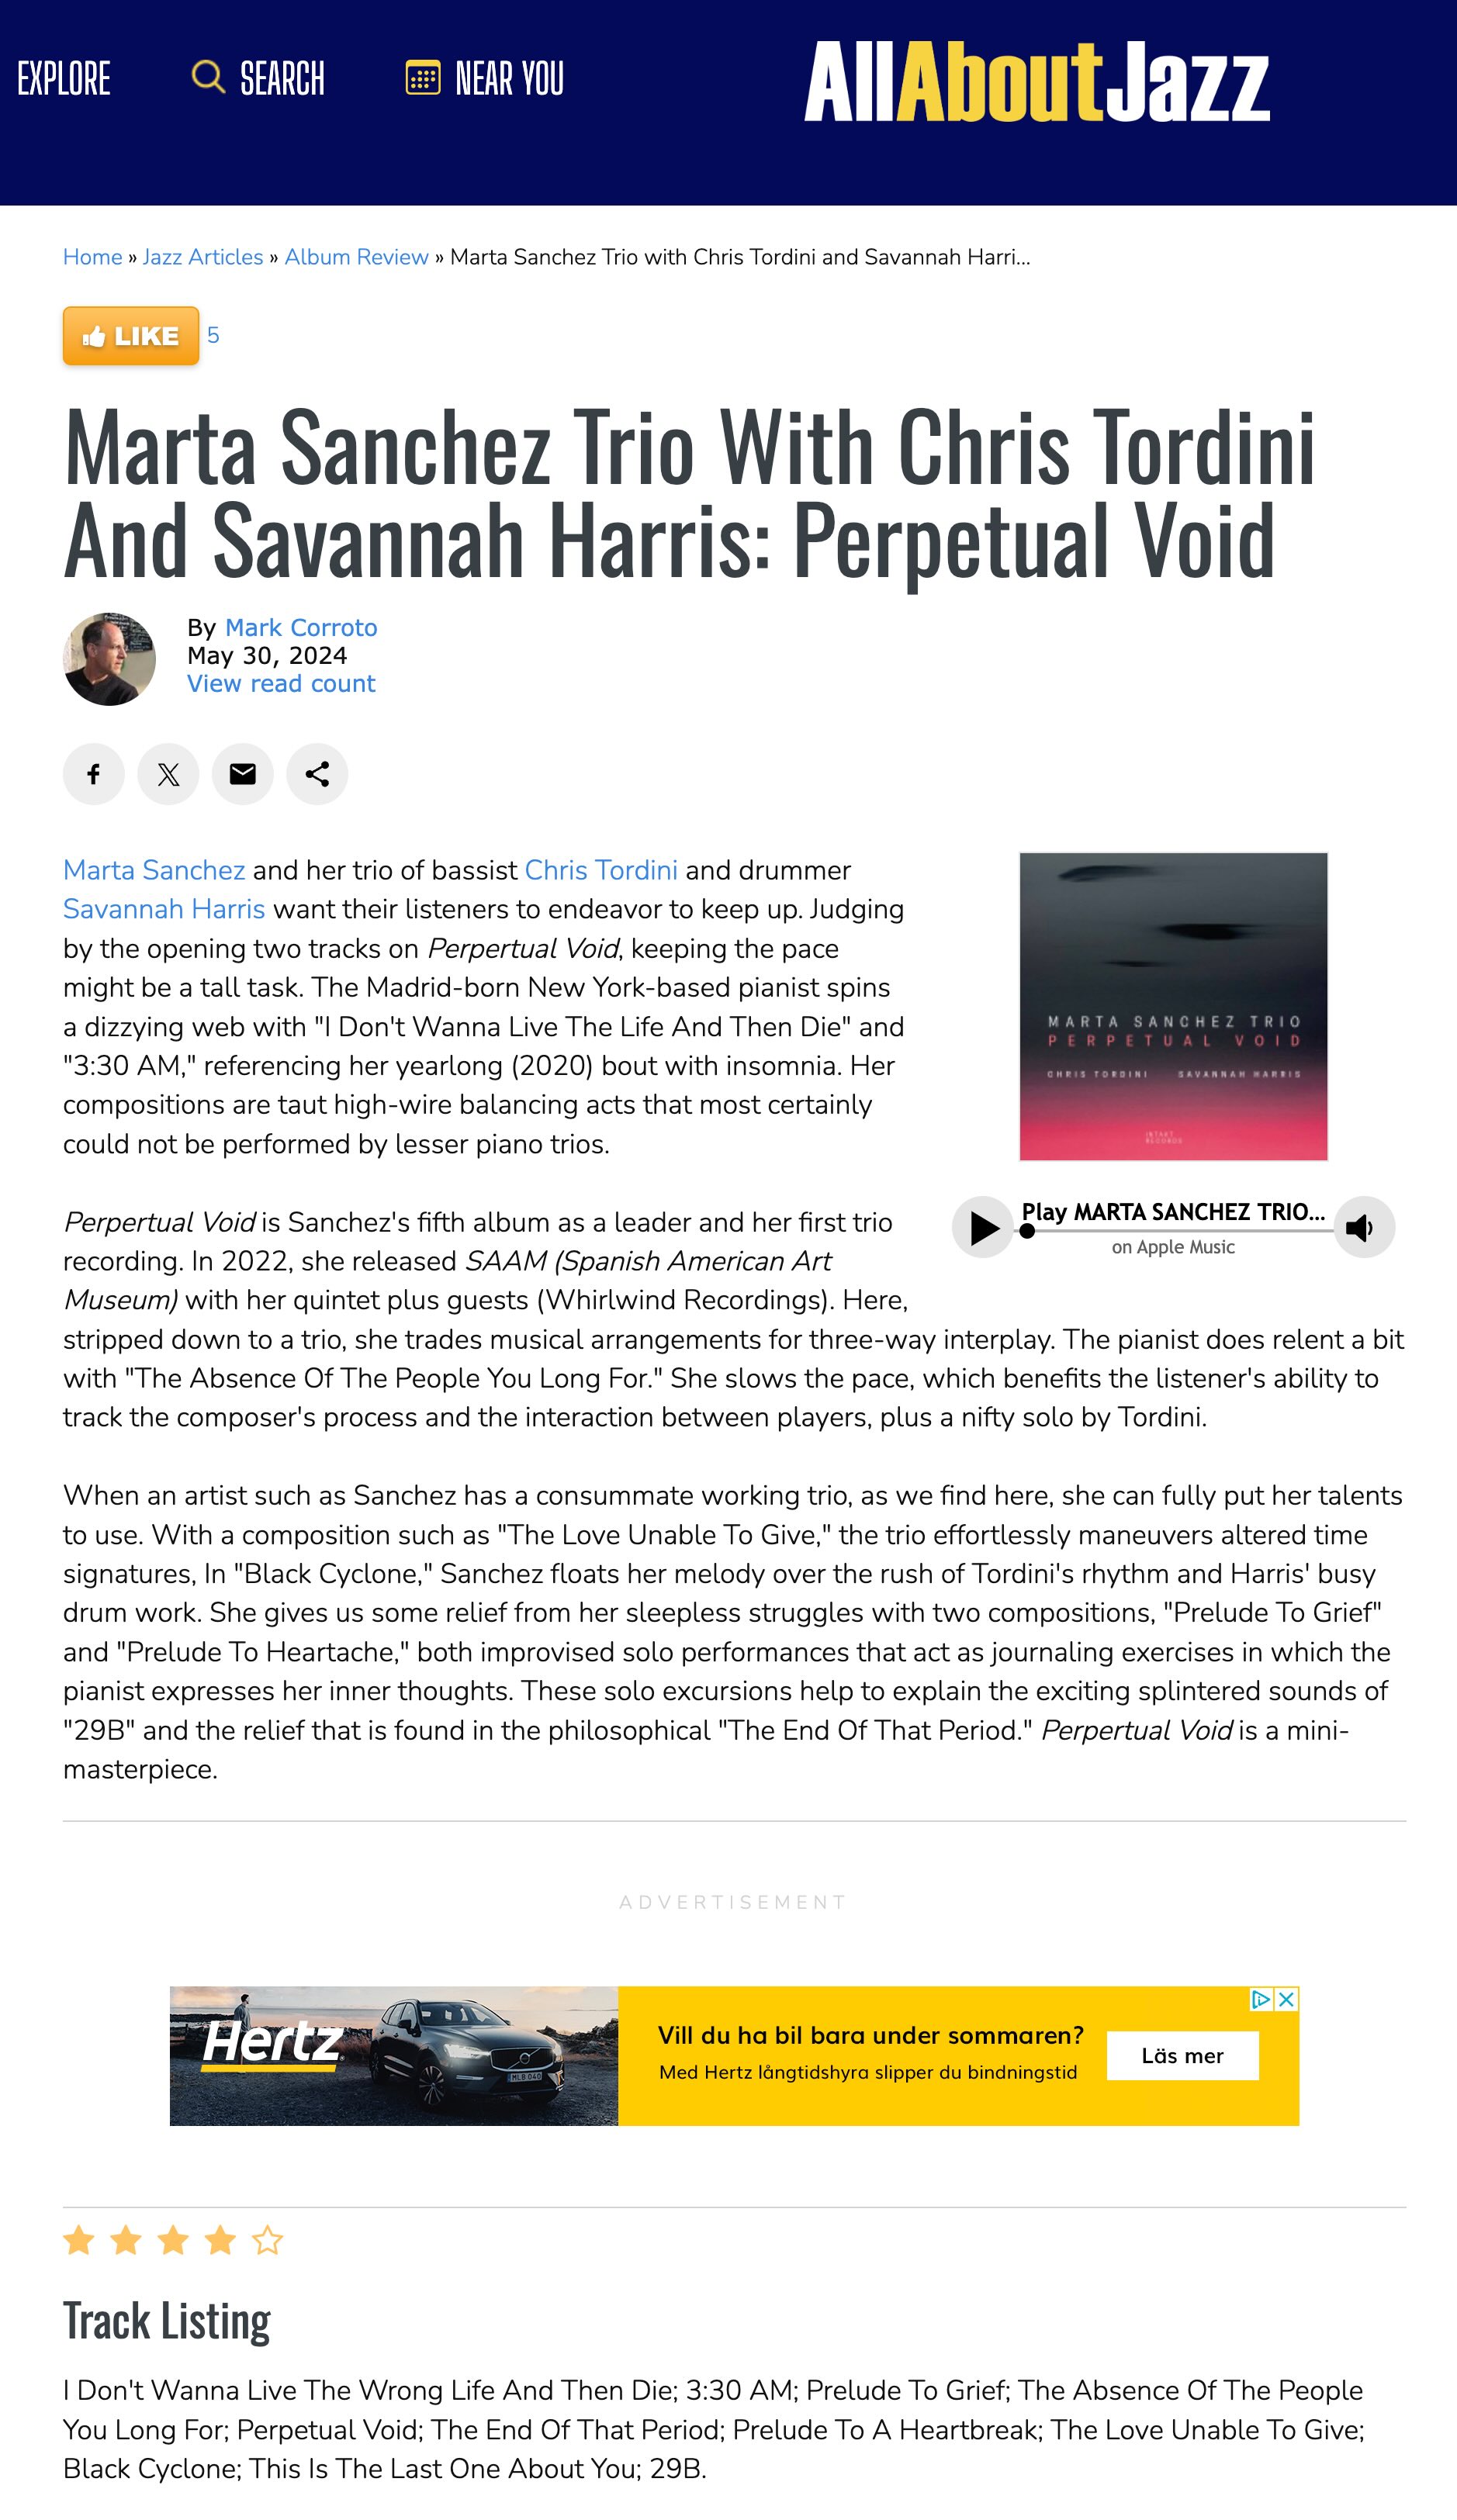 Marta Sanchez and her trio of bassist Chris Tordini and drummer Savannah Harris want their listeners to endeavor to keep up. Judging by the opening two tracks on Perpertual Void, keeping the pace might be a tall task.